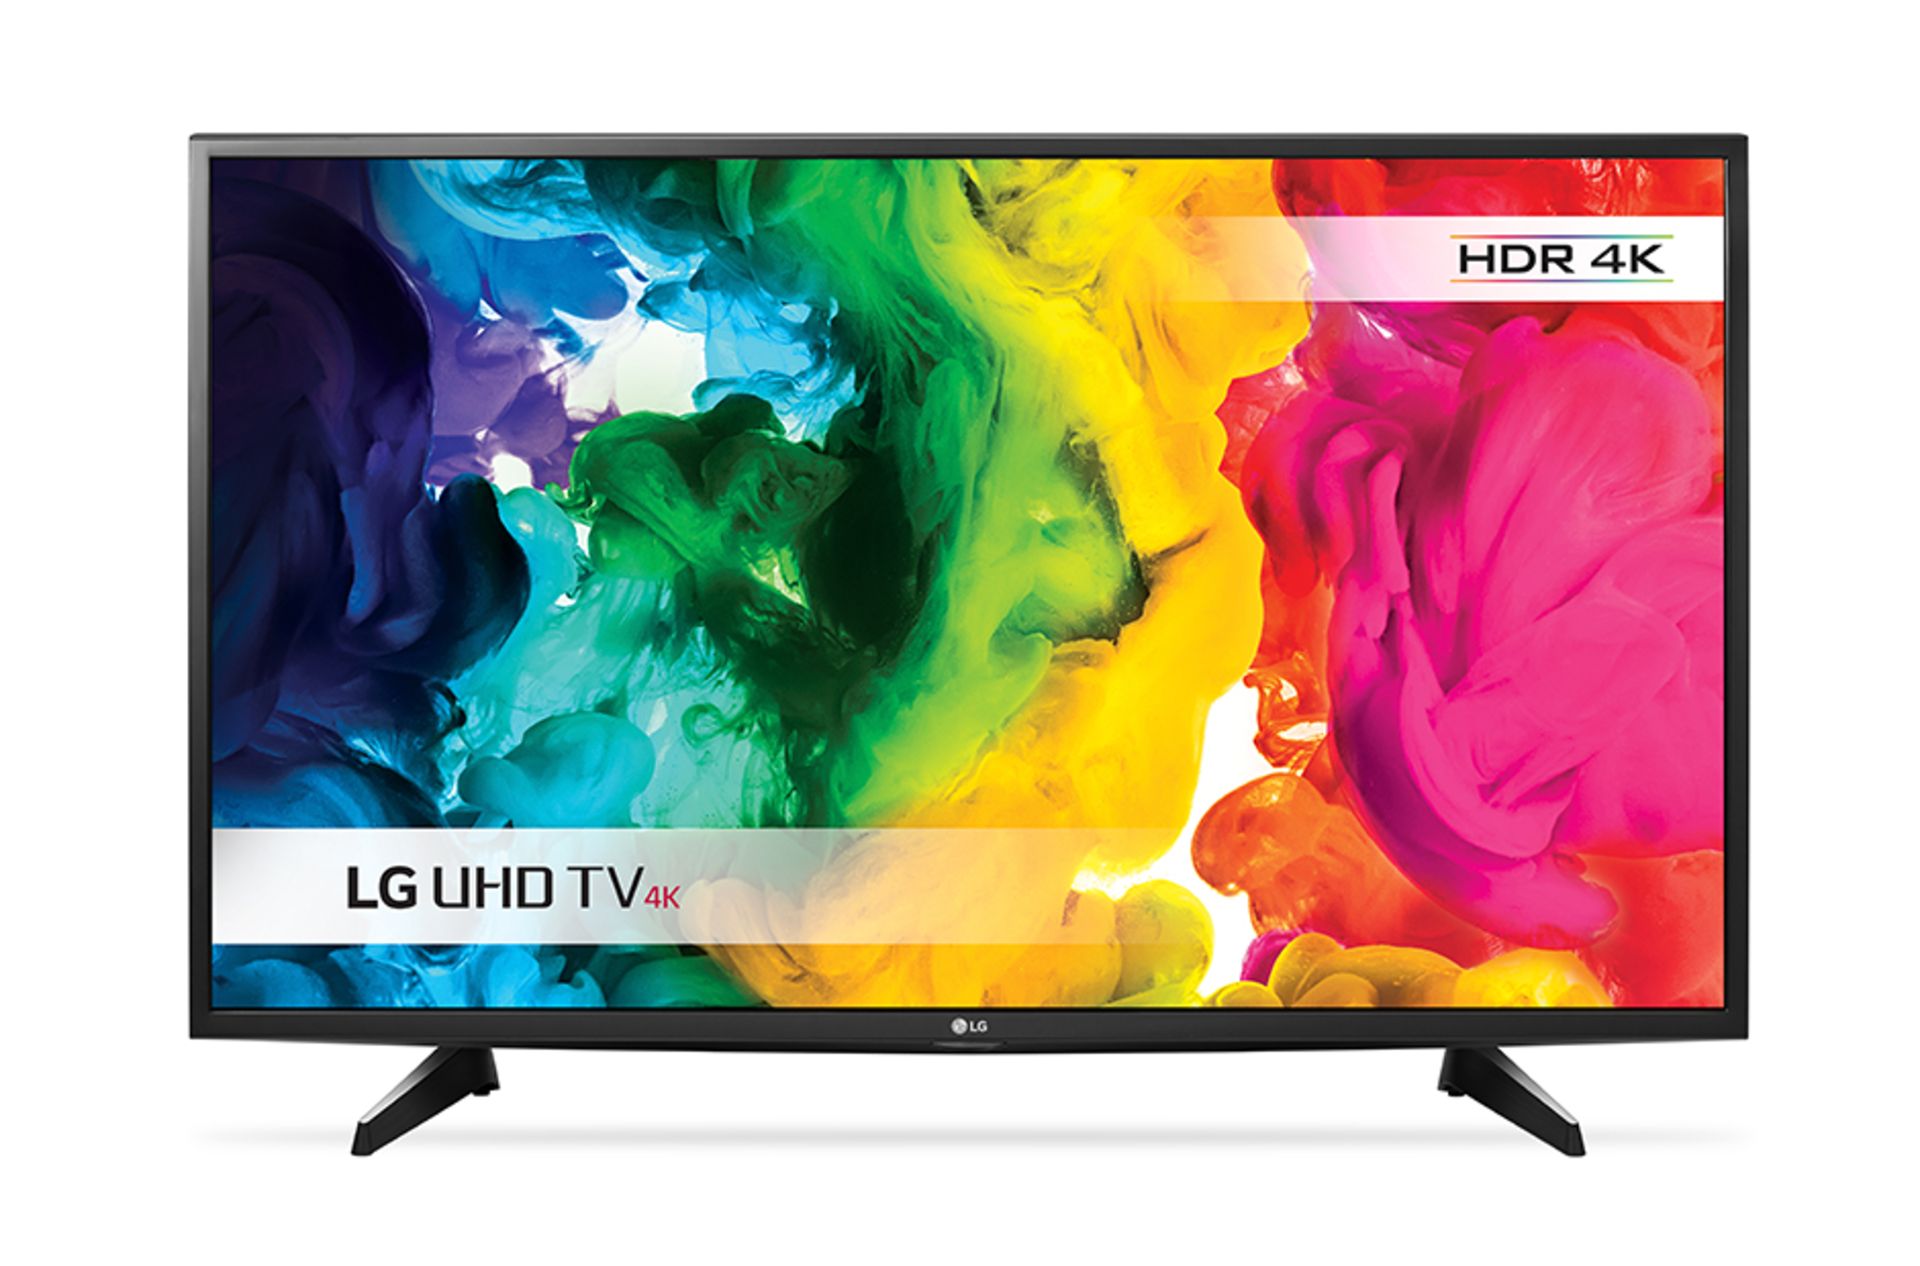 + VAT Grade A LG 43 inch HDR 4K ULTRA HD LED SMART TV WITH FREEVIEW HD & WEBOS 3.0 & WIFI 43UH610V